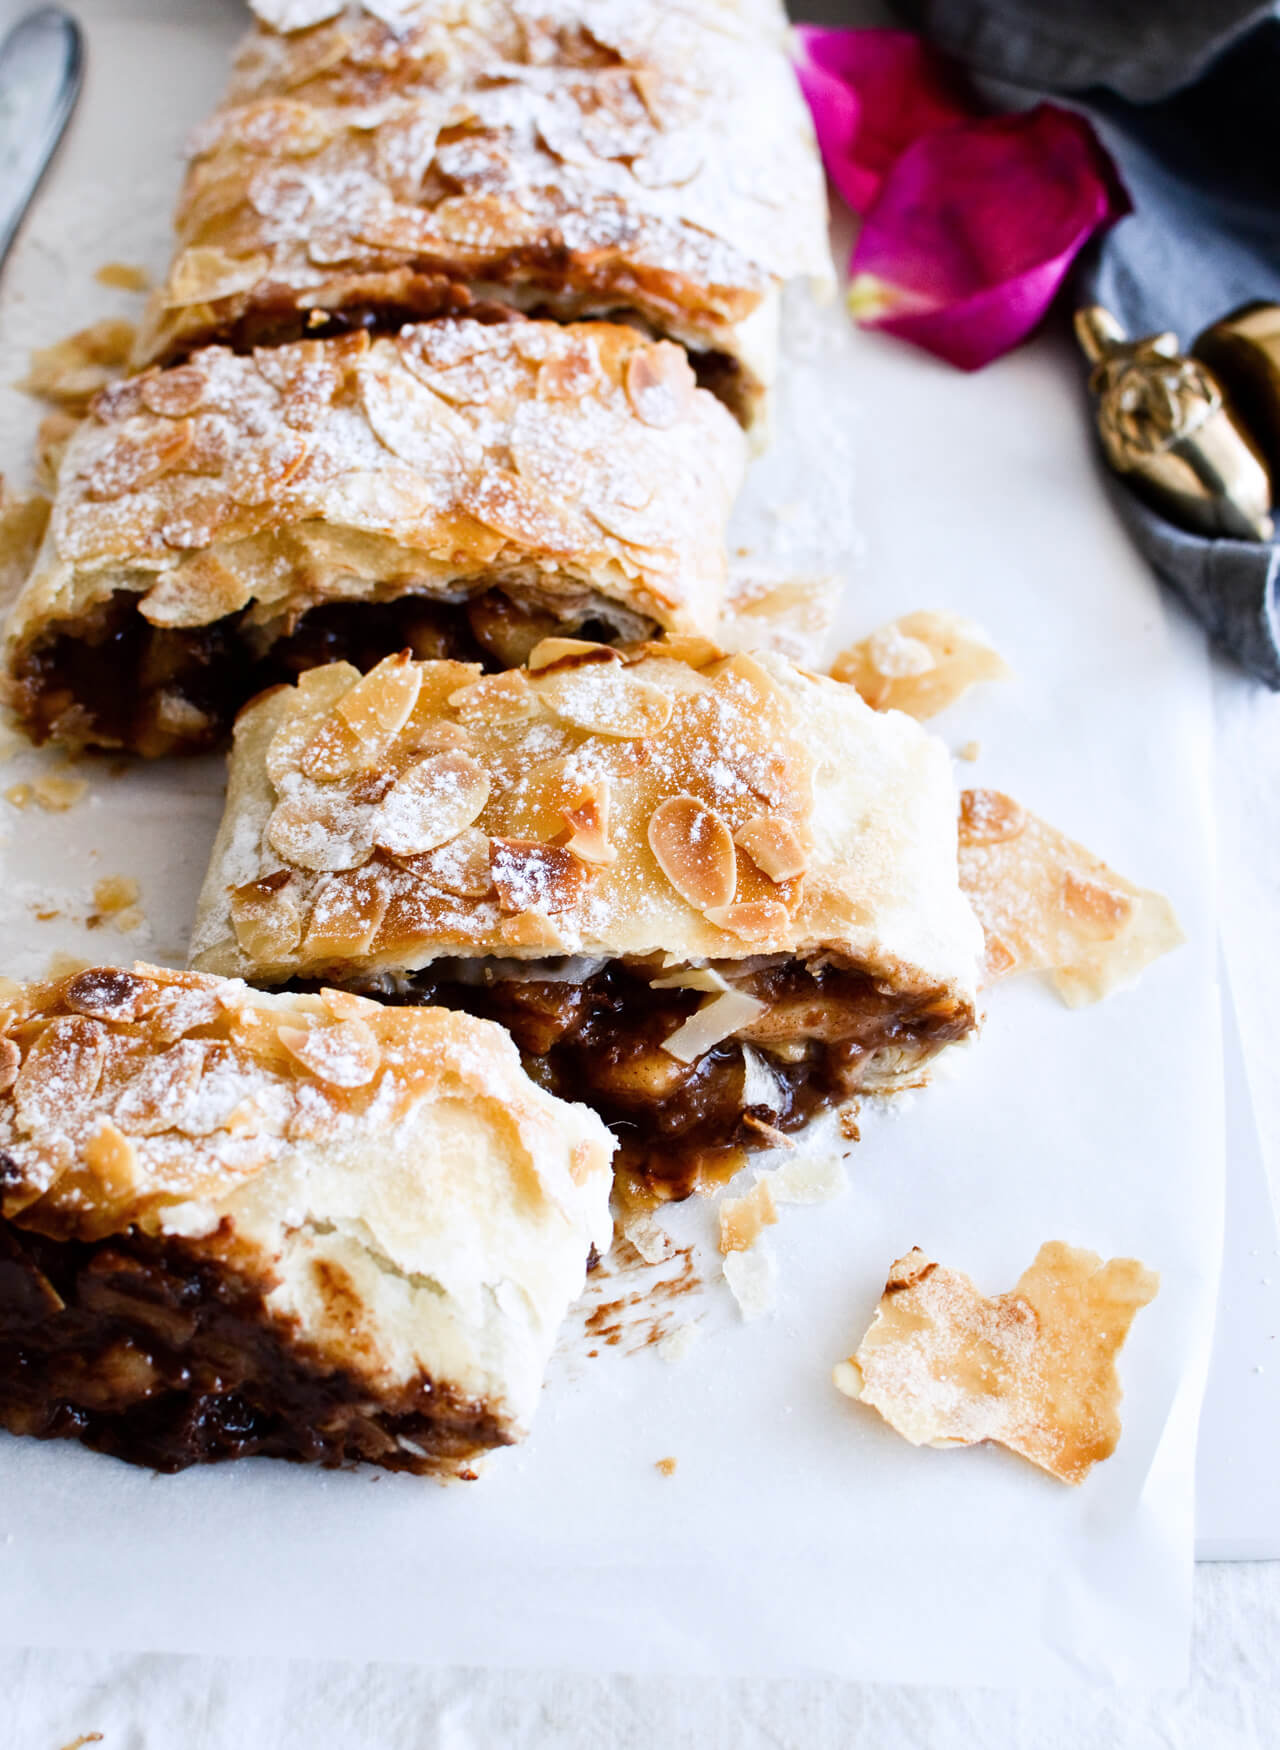 Easy chocolate pear strudel with cinnamon and almond flavor makes the perfect holiday dessert! Great warm or cold, made easily with phyllo pastry. Quick dessert!